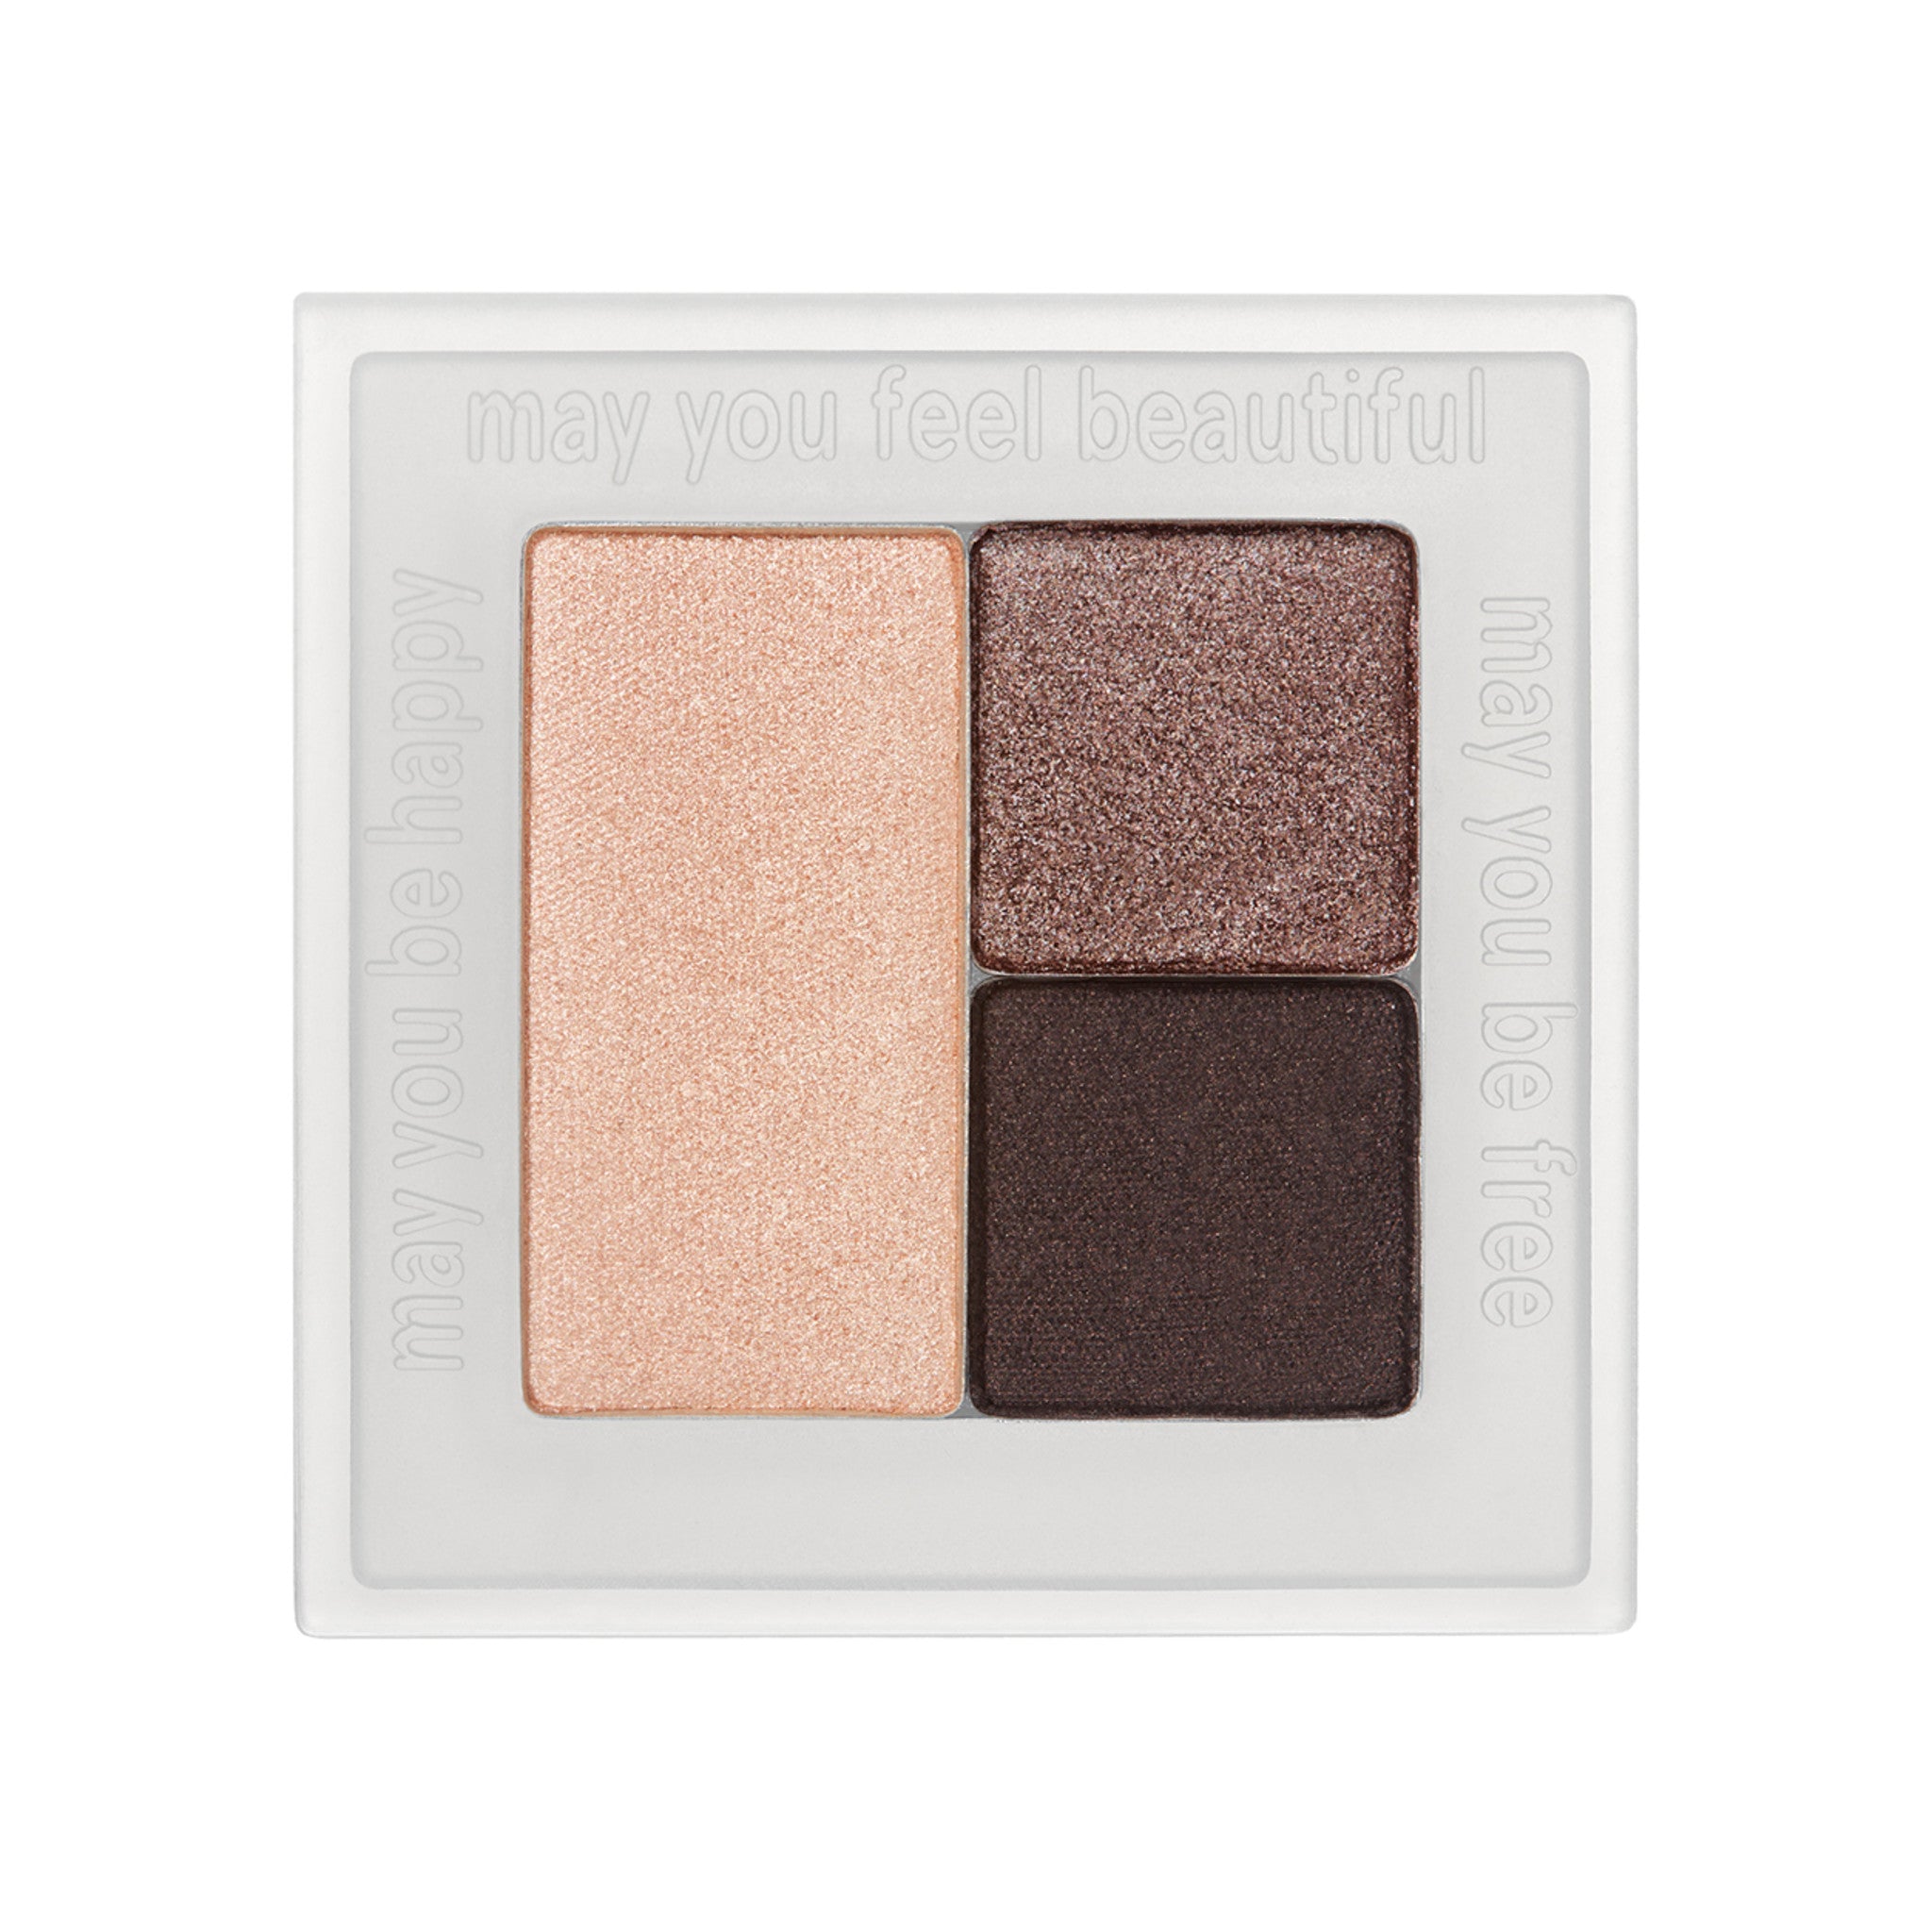 Neen Pretty Shady Pressed Pigment Trio Color/Shade variant: Zen main image. This product is in the color multi